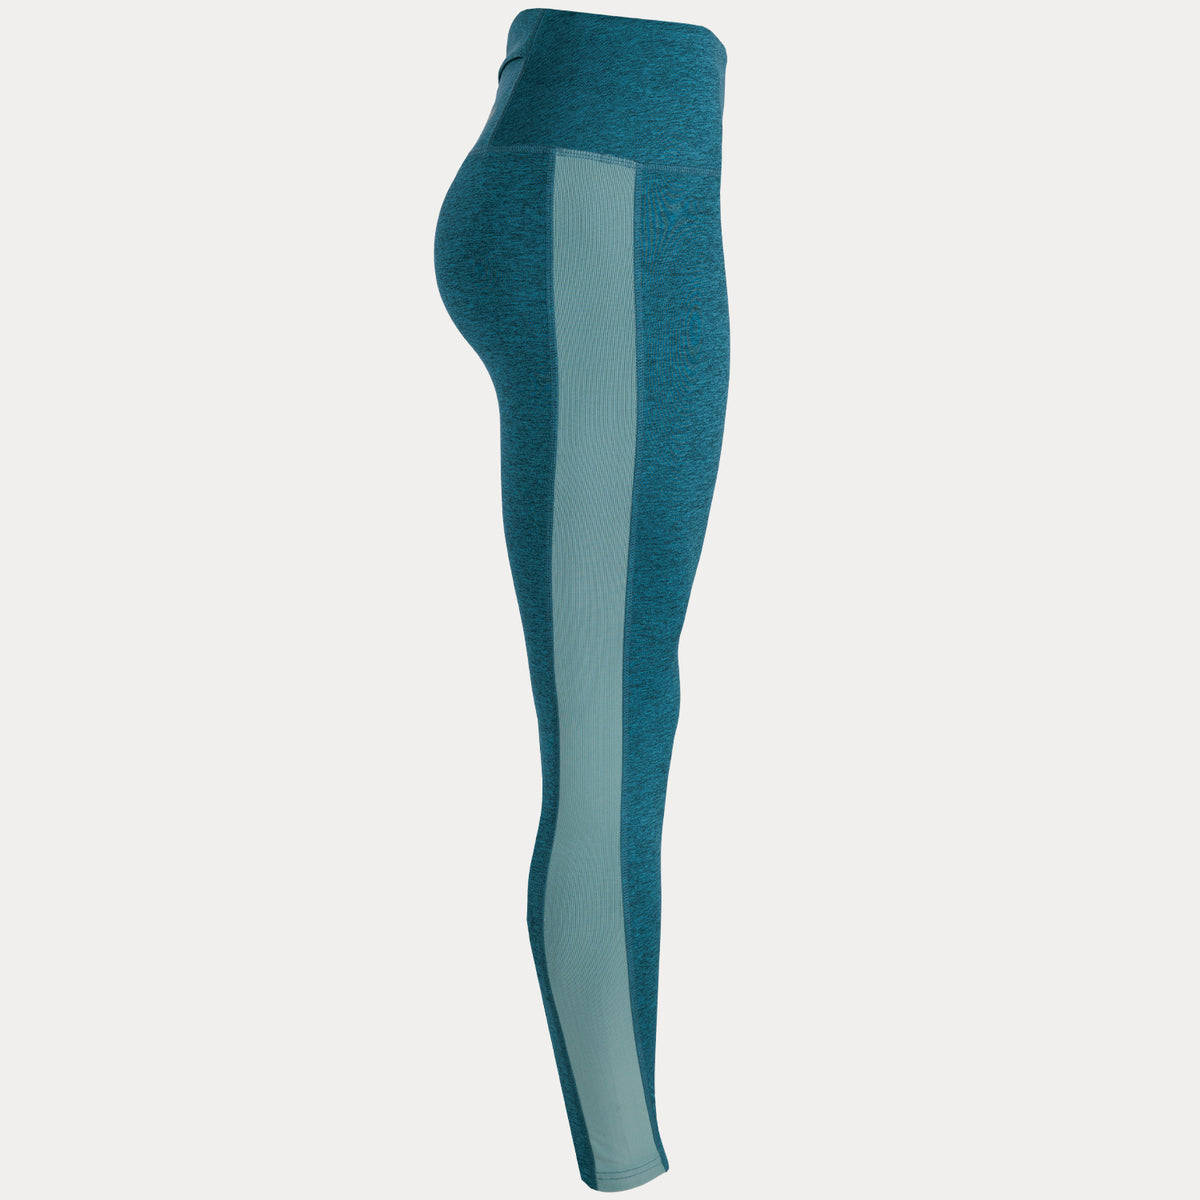 side view of heathered leggings in dark blue with mesh running along side